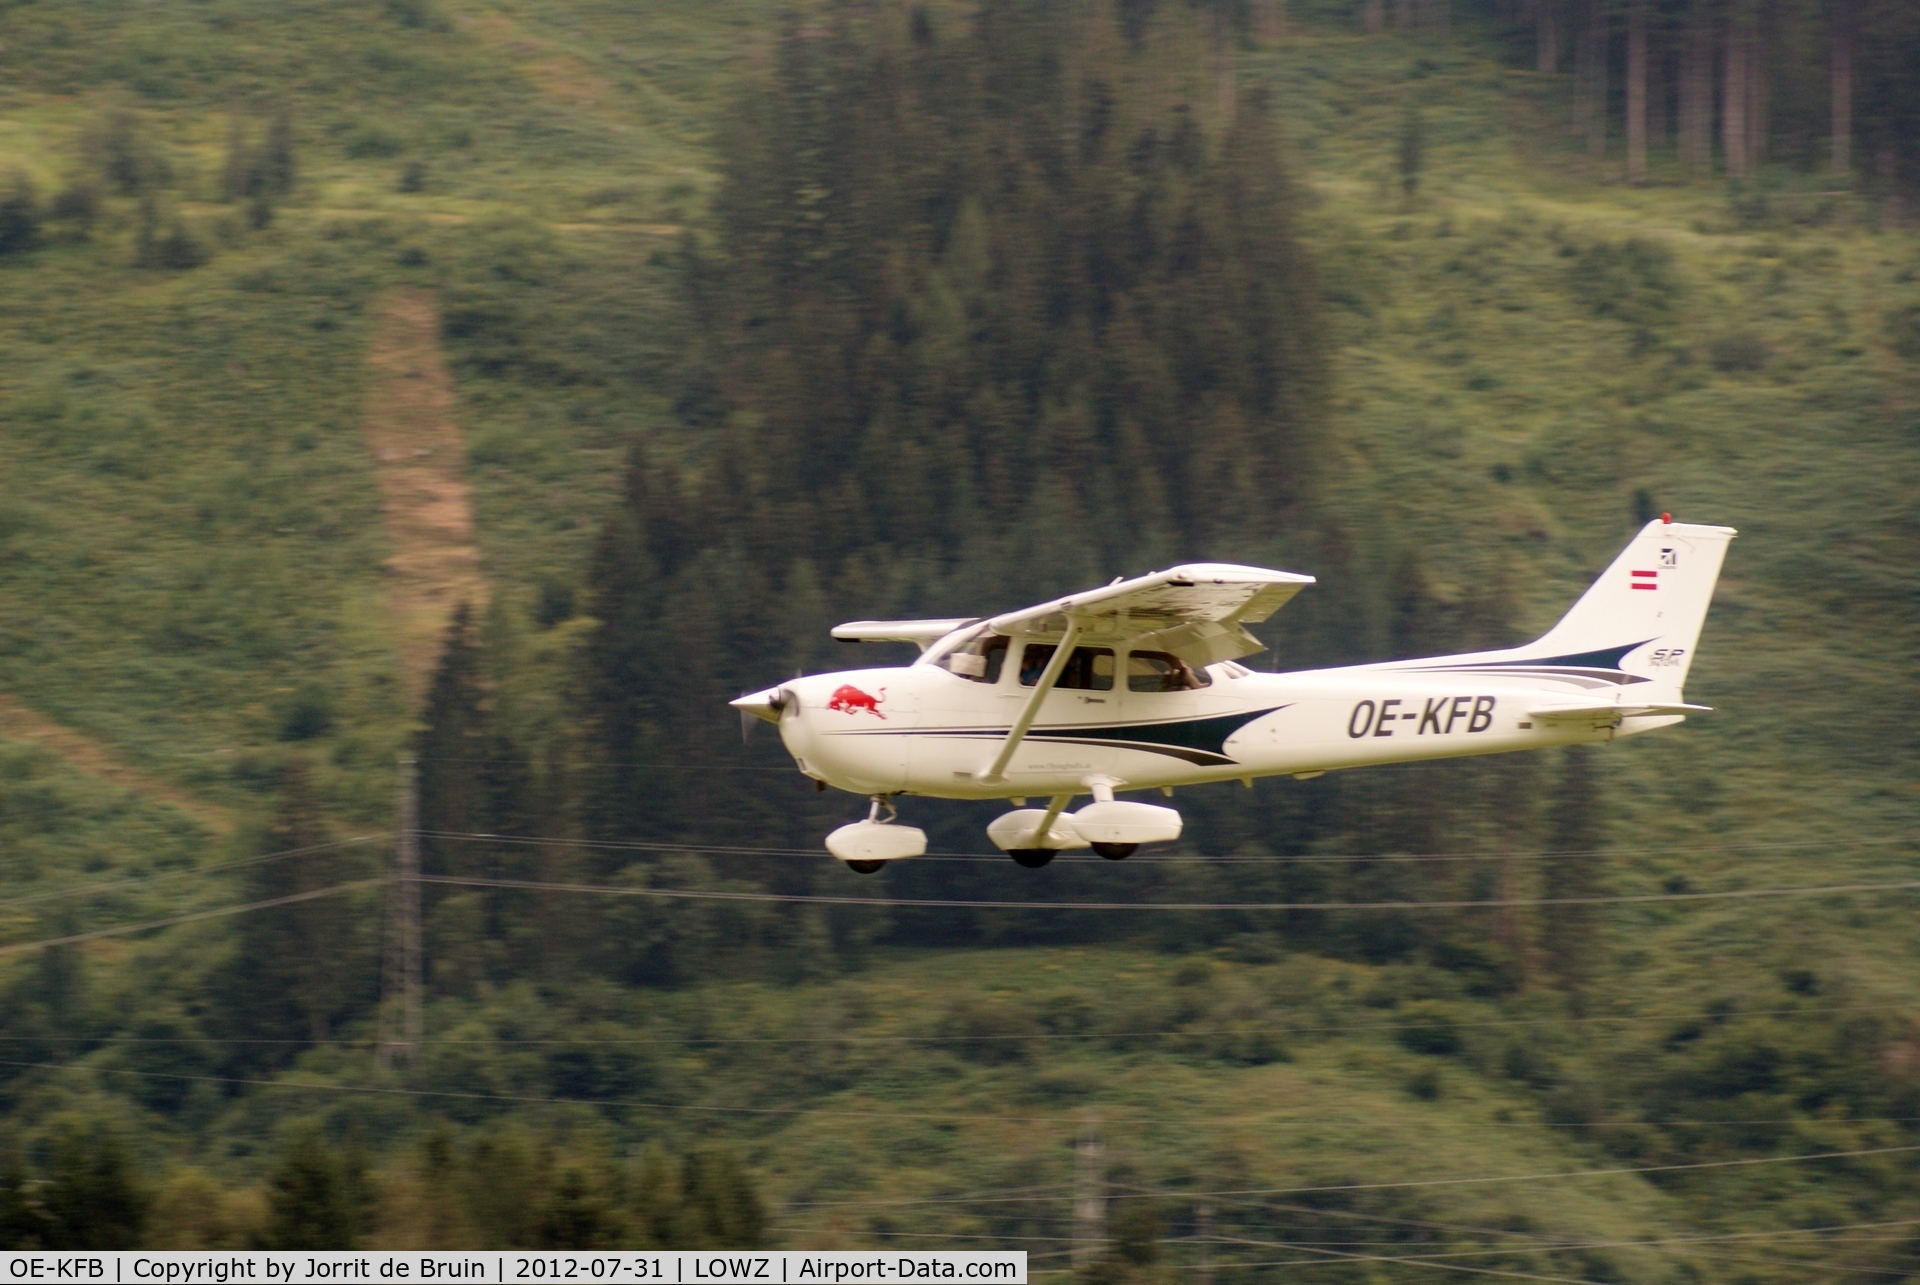 OE-KFB, 2004 Cessna 172S C/N 172S9584, At a good altitude for the approach for the short runway 08 at Zell am See.